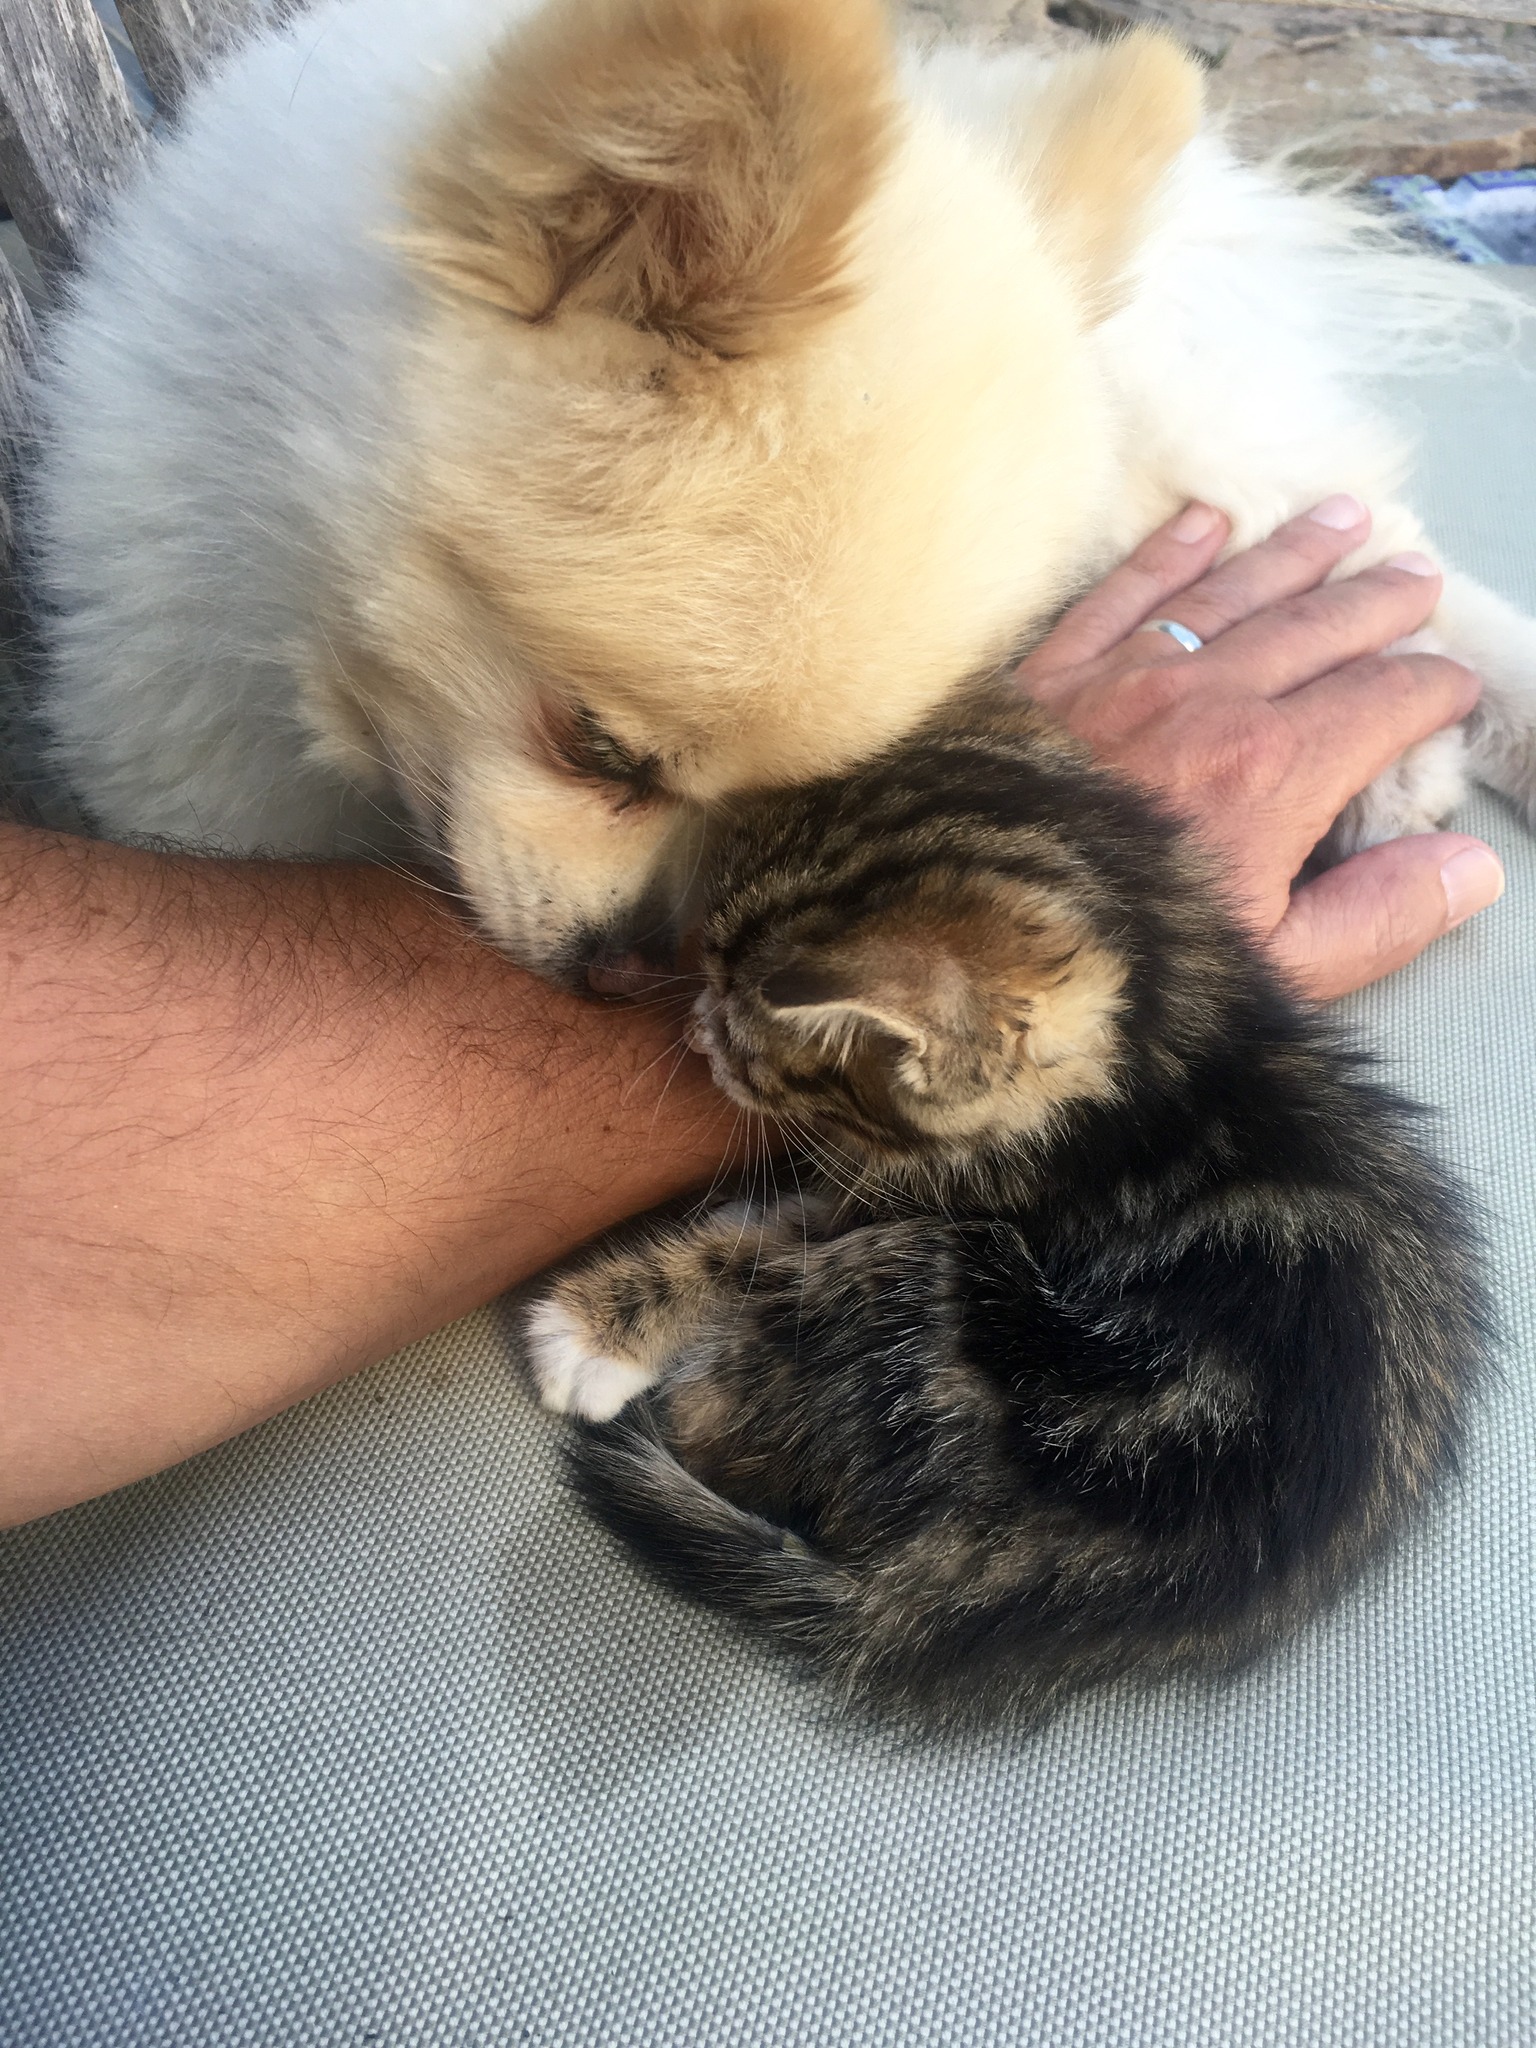 kitten and a dog leaning on man's hand